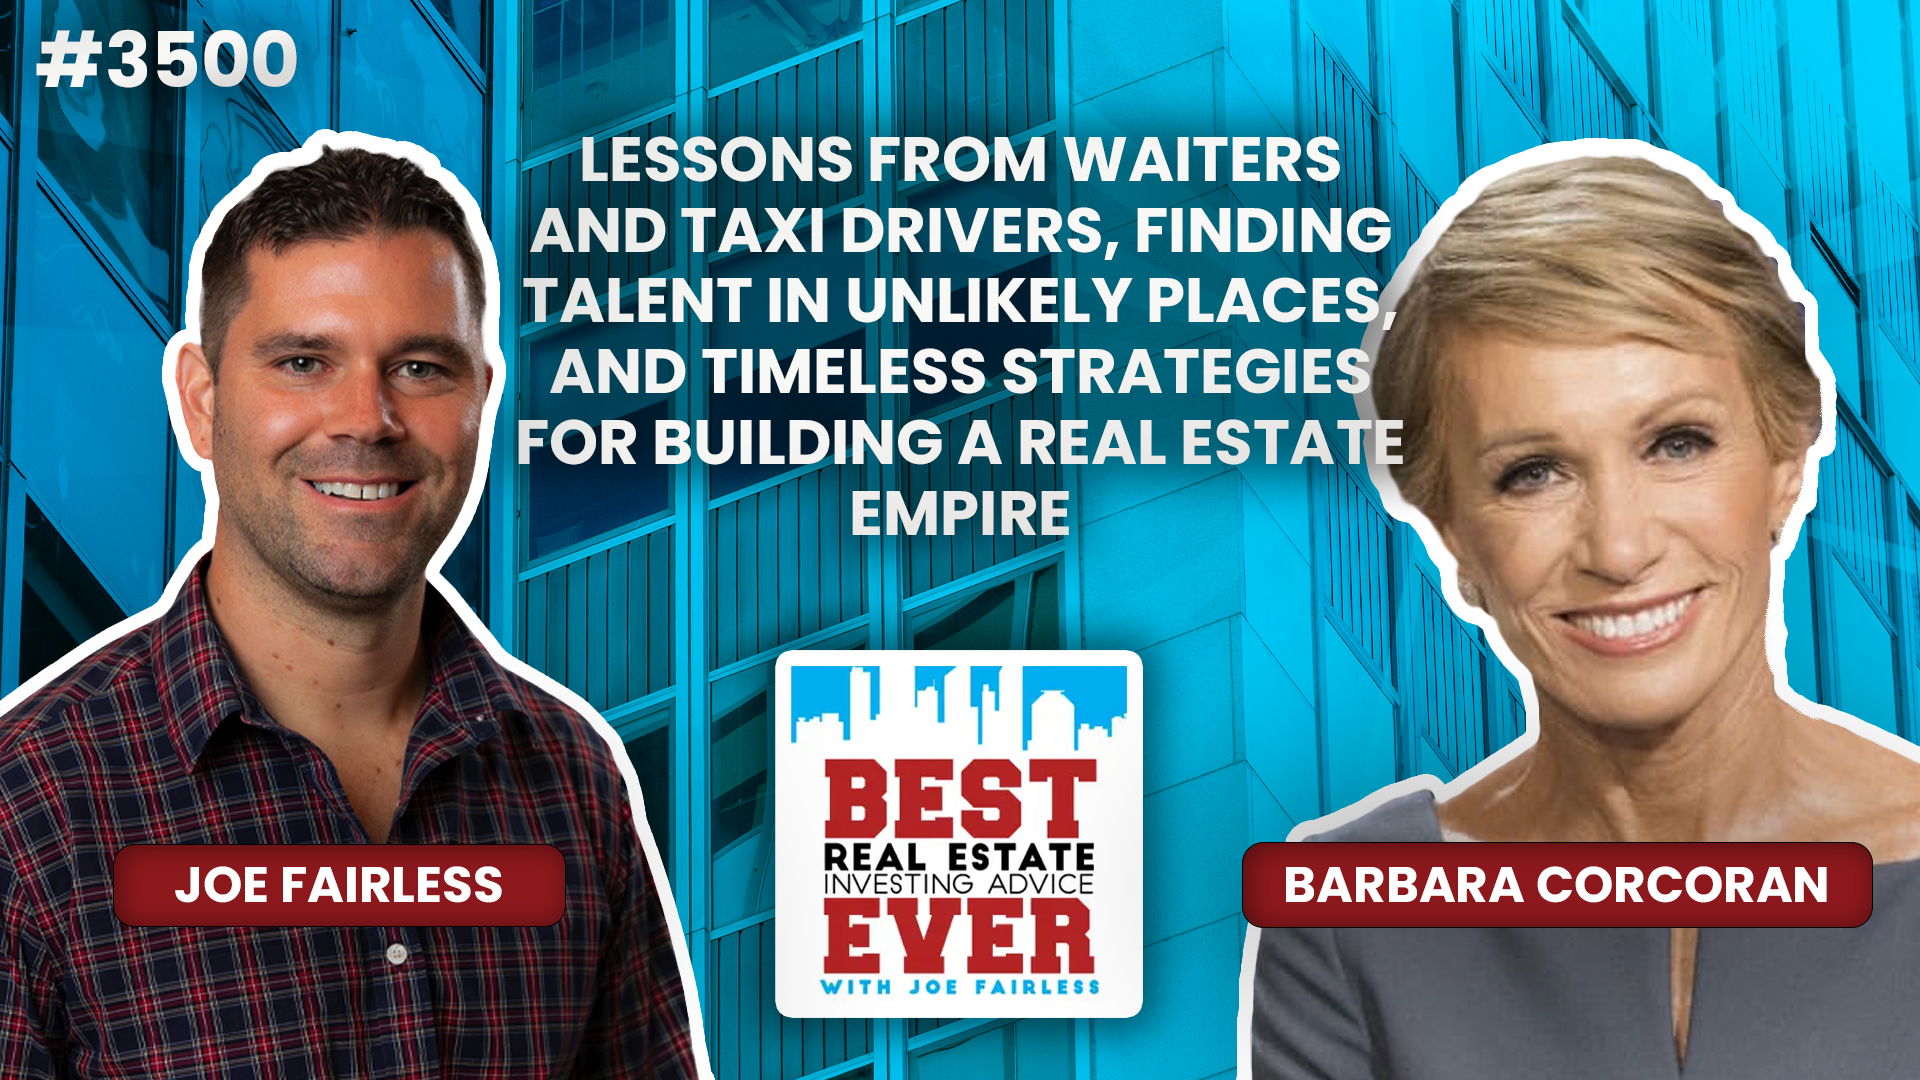 JF3500: Barbara Corcoran — Lessons from Waiters and Taxi Drivers, Finding Talent in Unlikely Places, and Timeless Strategies for Building a Real Estate Empire